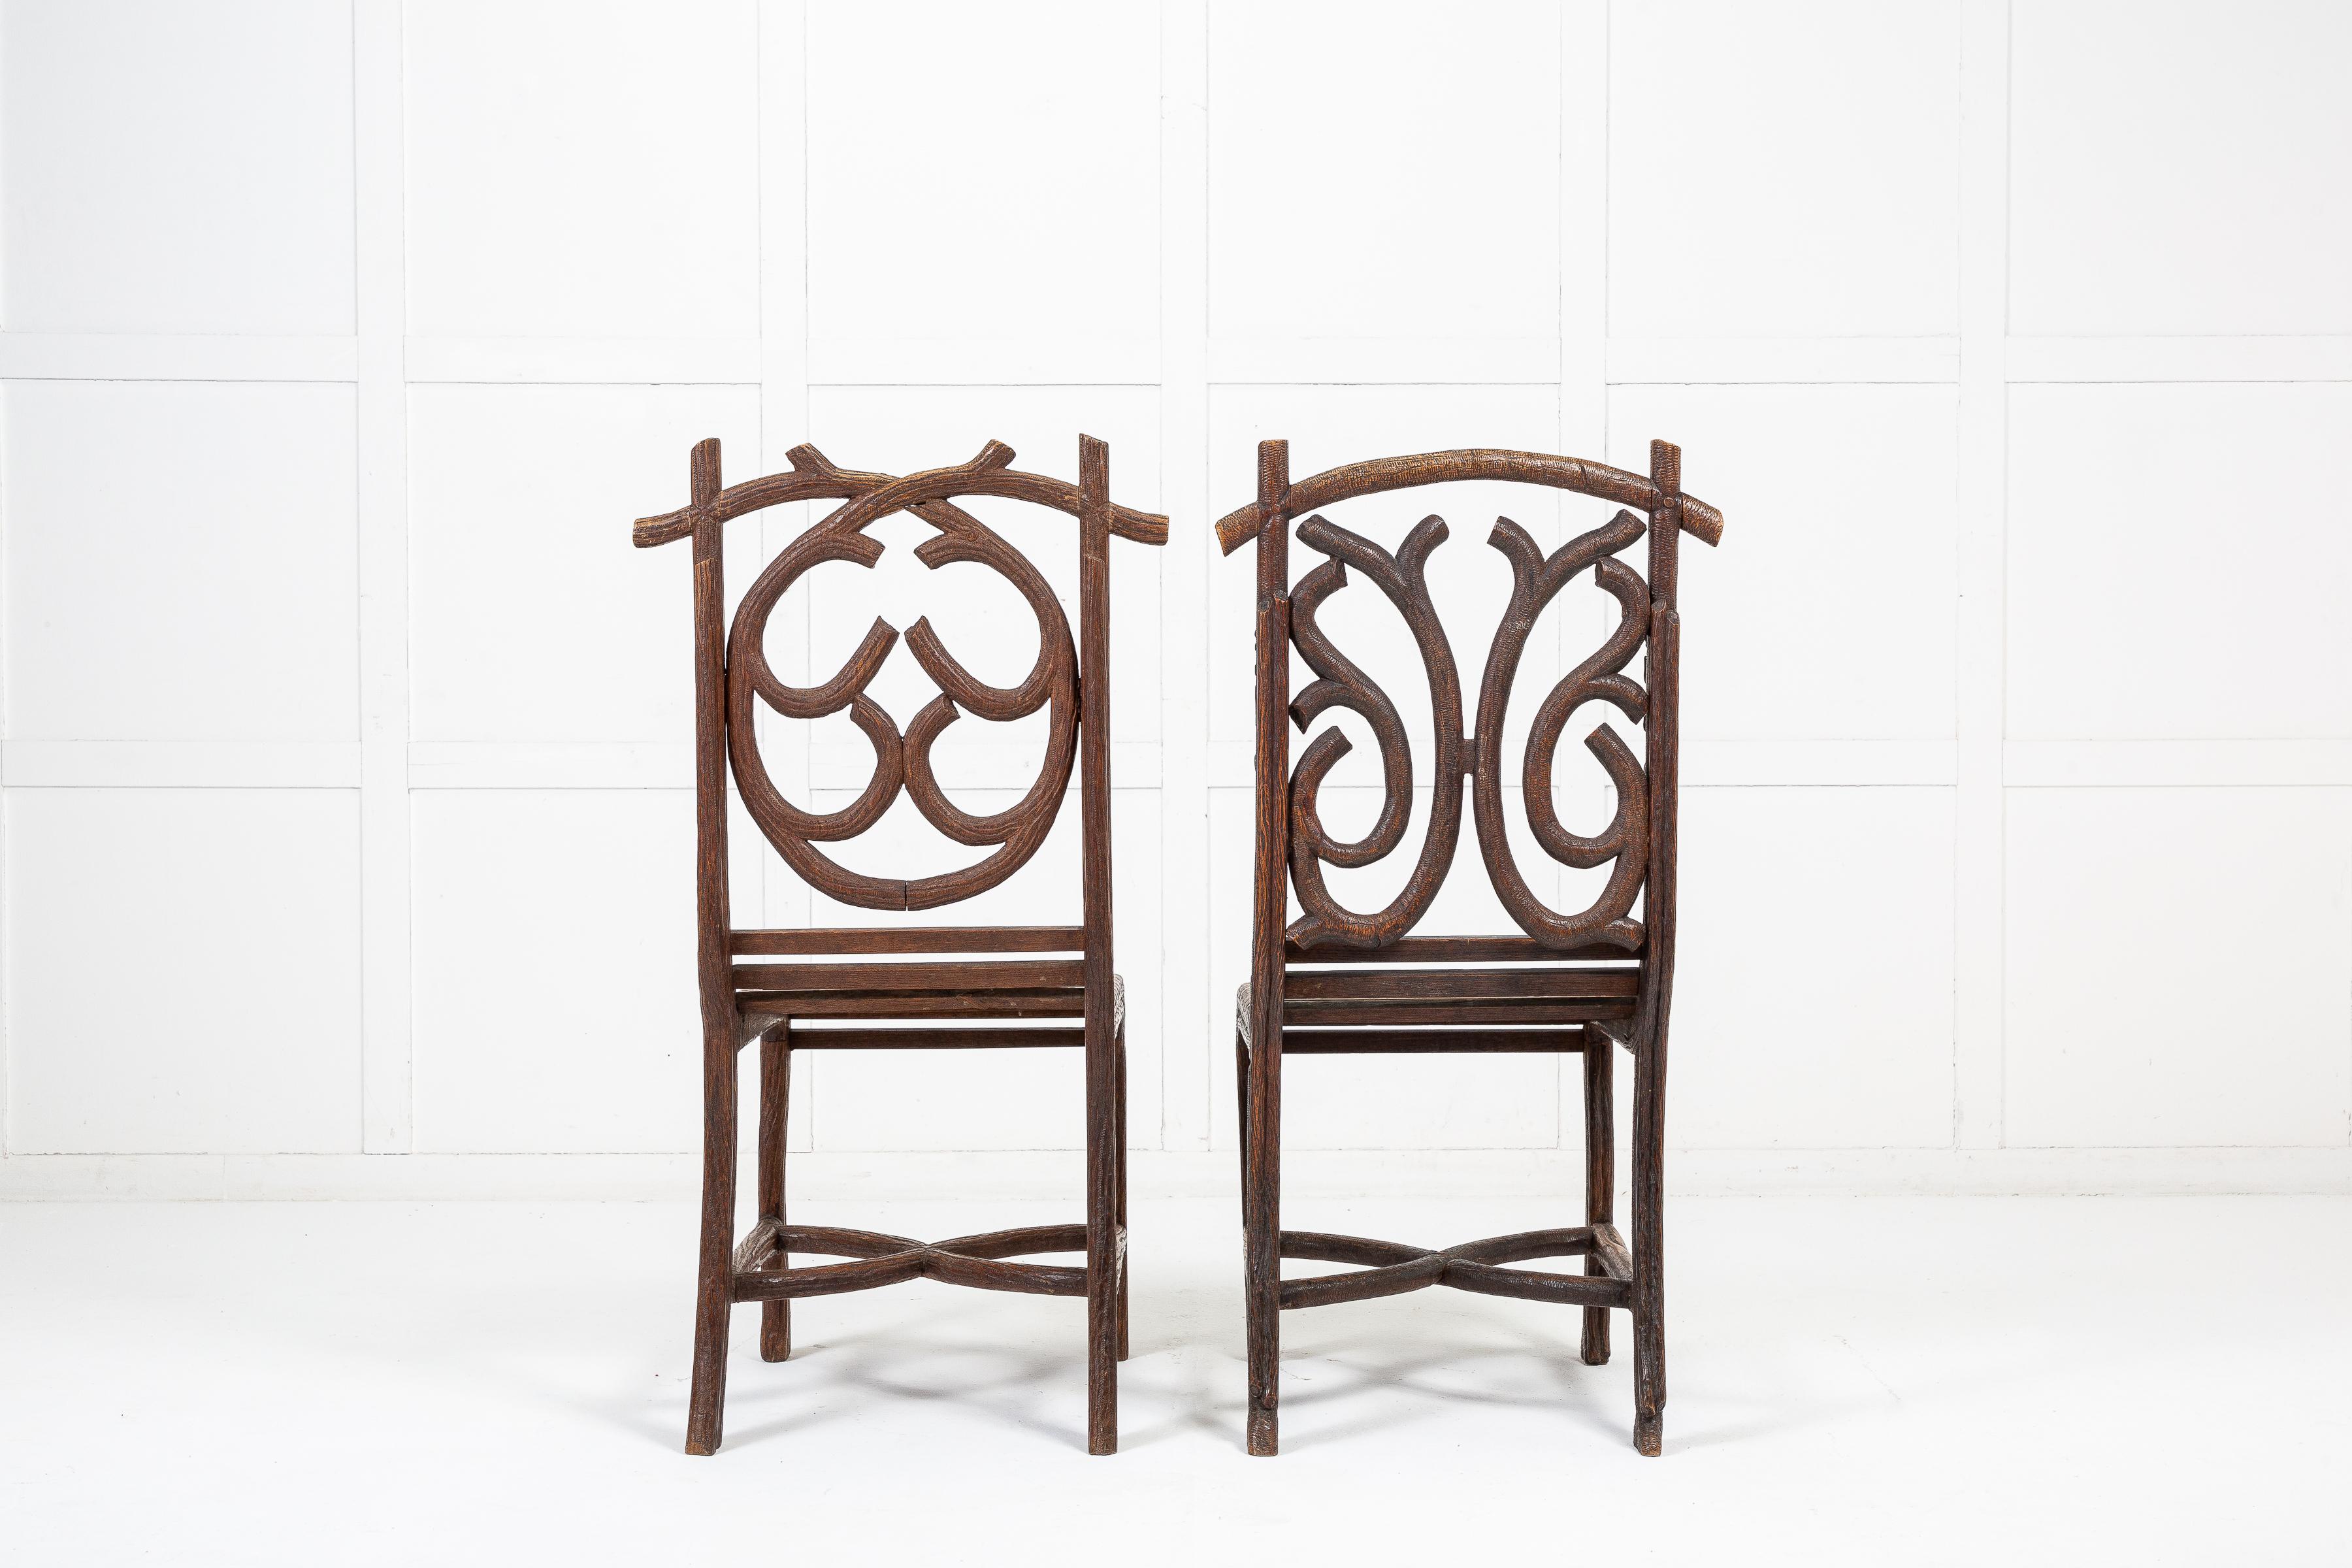 An unusual pair of 19th century carved linden wood chairs. The backs and legs are carved in the form of tree branches and vines adorned with acorns and leaves. Having slatted bench seats joining the frame and traditional curved, cross stretchers